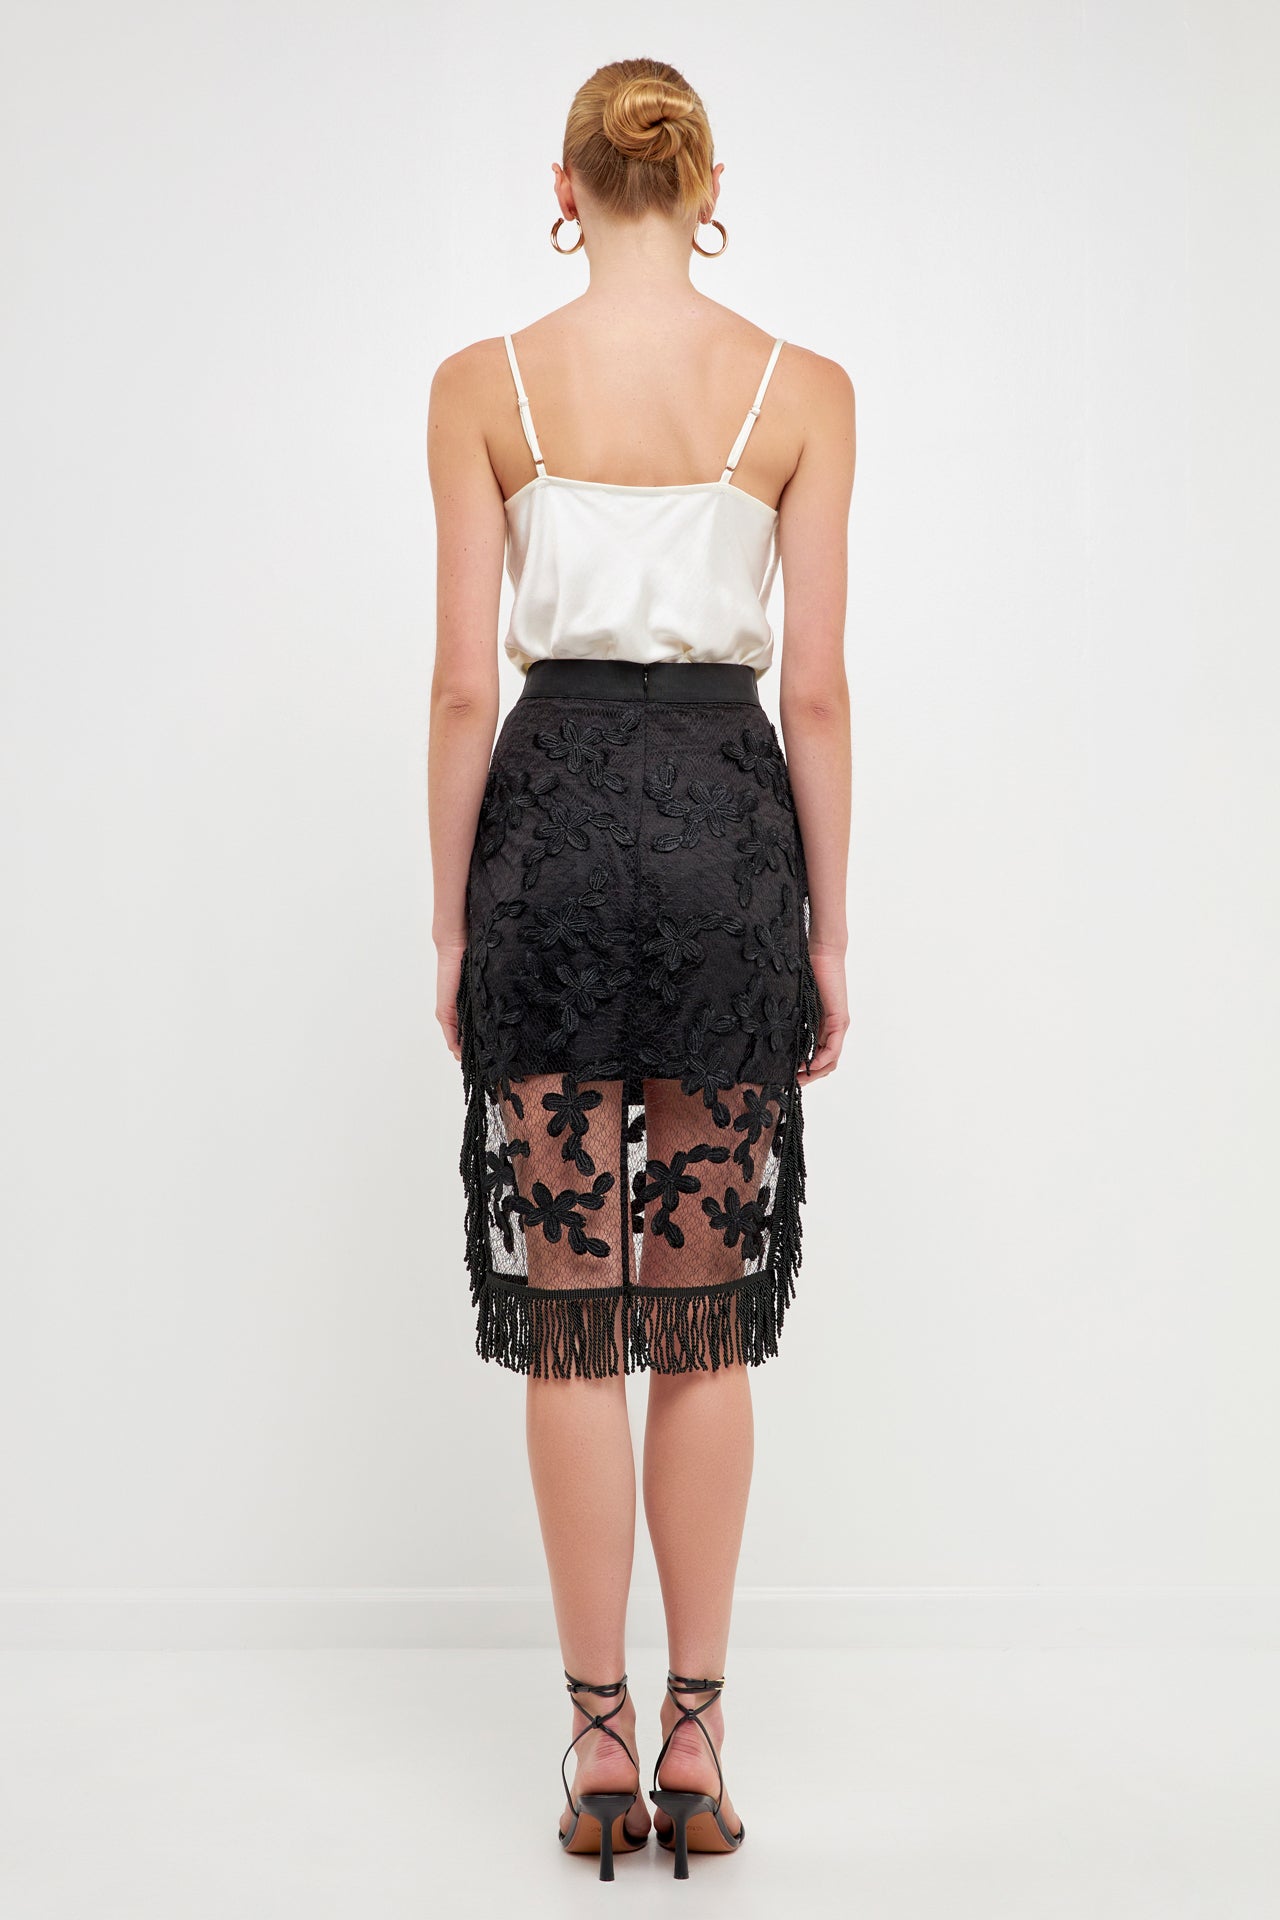 ENDLESS ROSE - Floral Lace Skirt - SKIRTS available at Objectrare